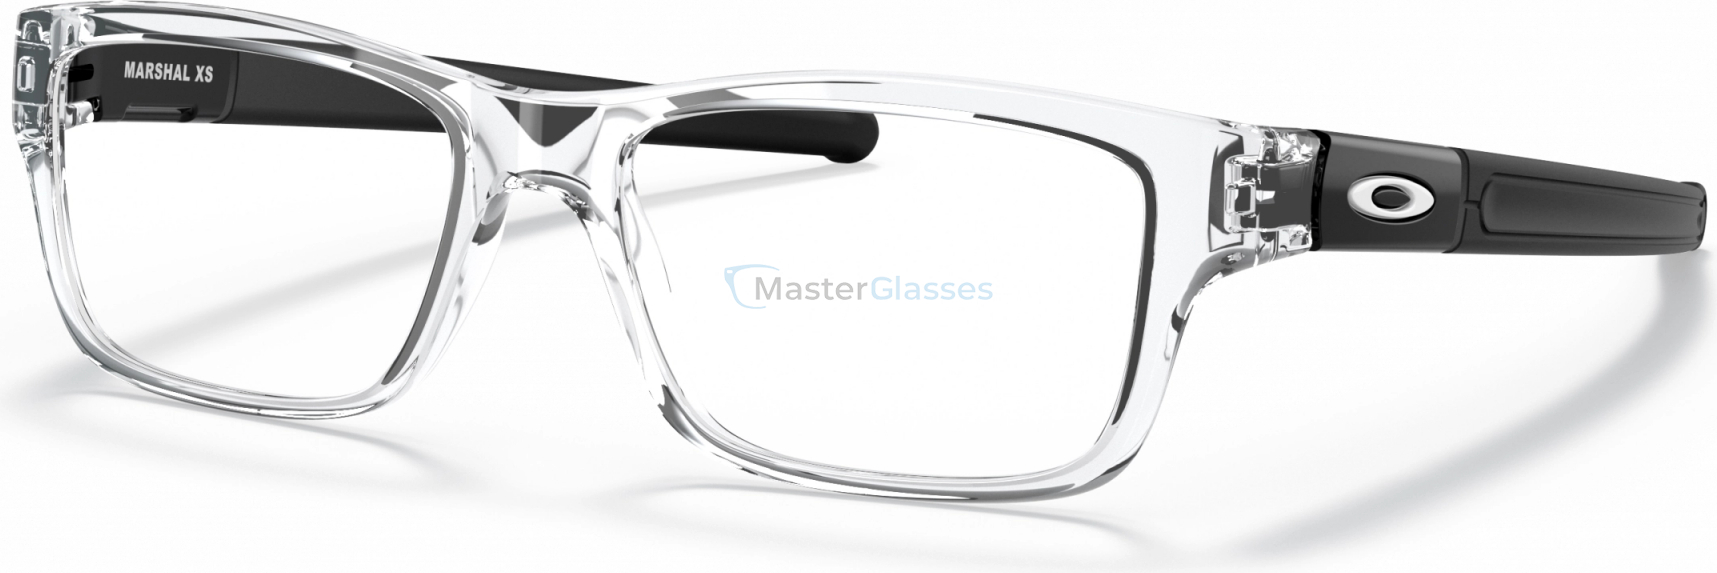  Oakley Marshal Xs OY8005 800507 Polished Clear